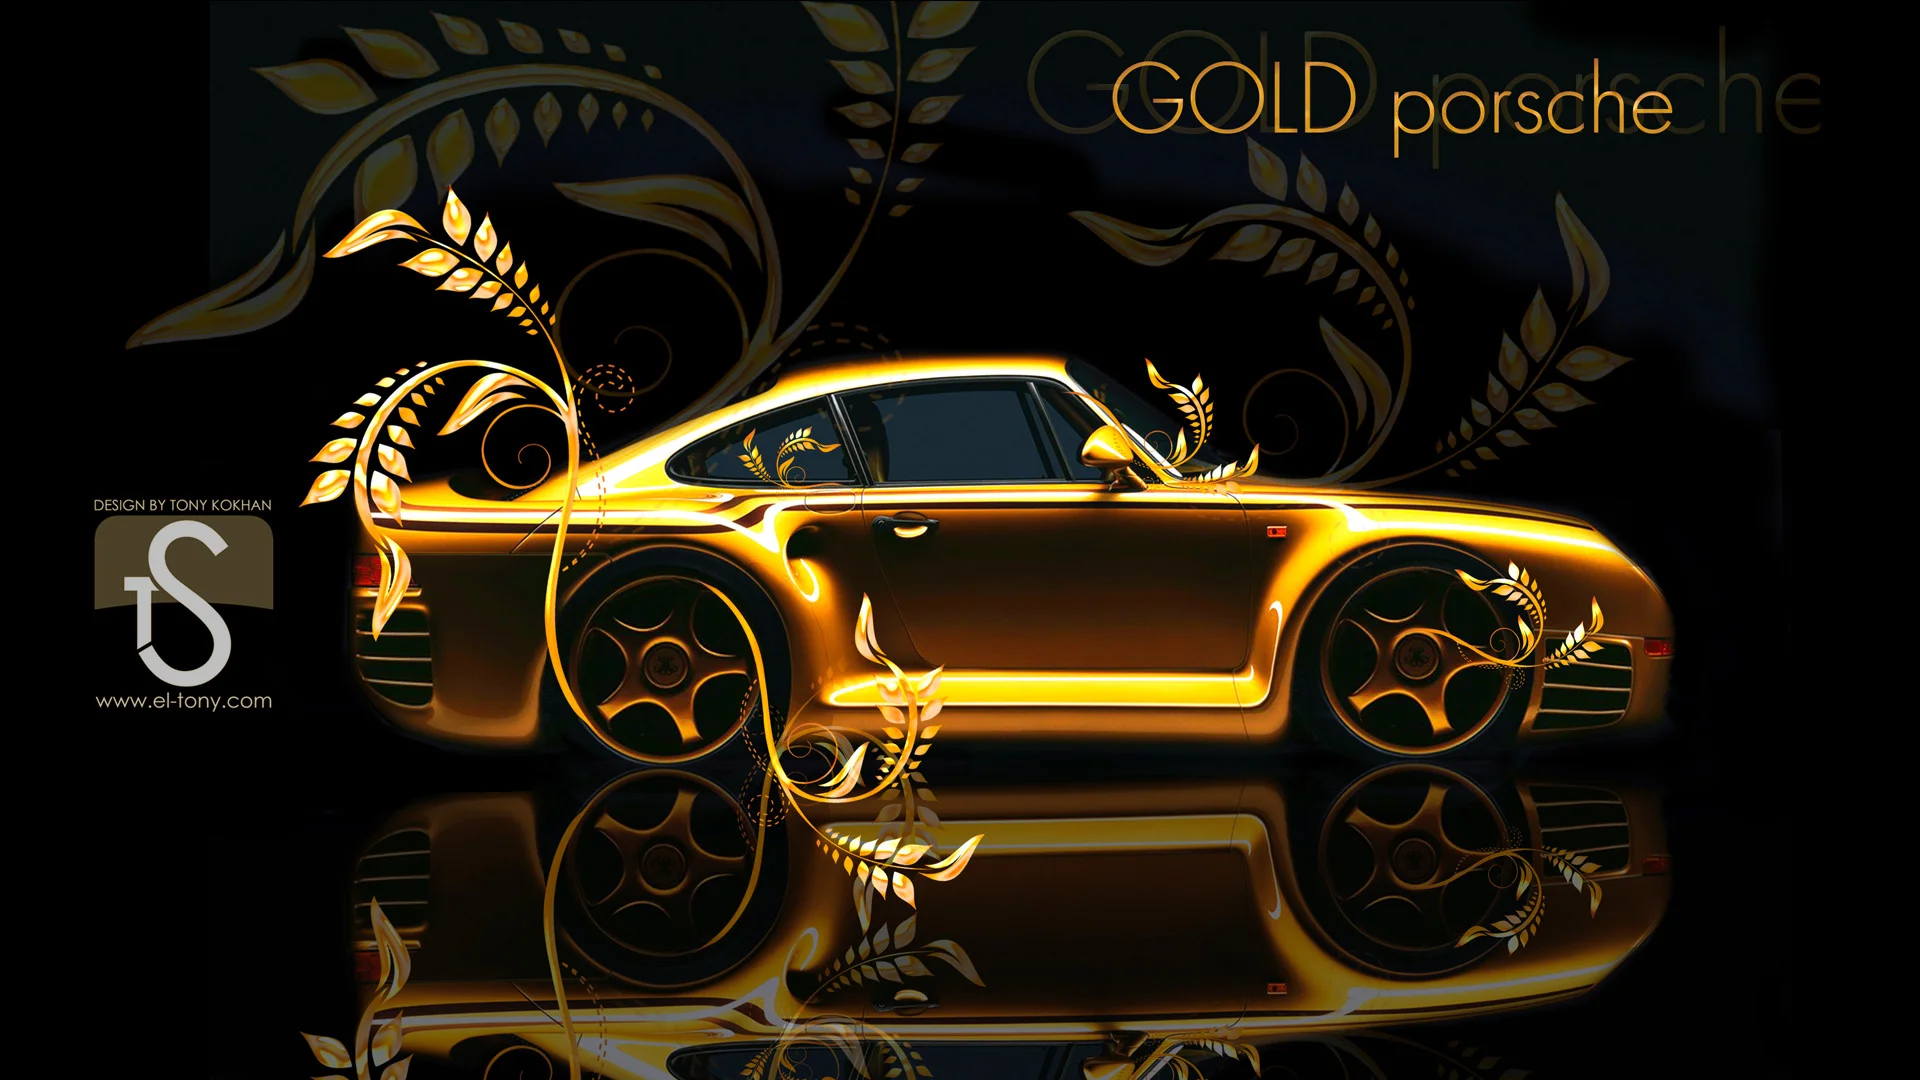 Wallpapers Tagged With GOLD | GOLD Car Wallpapers, Images